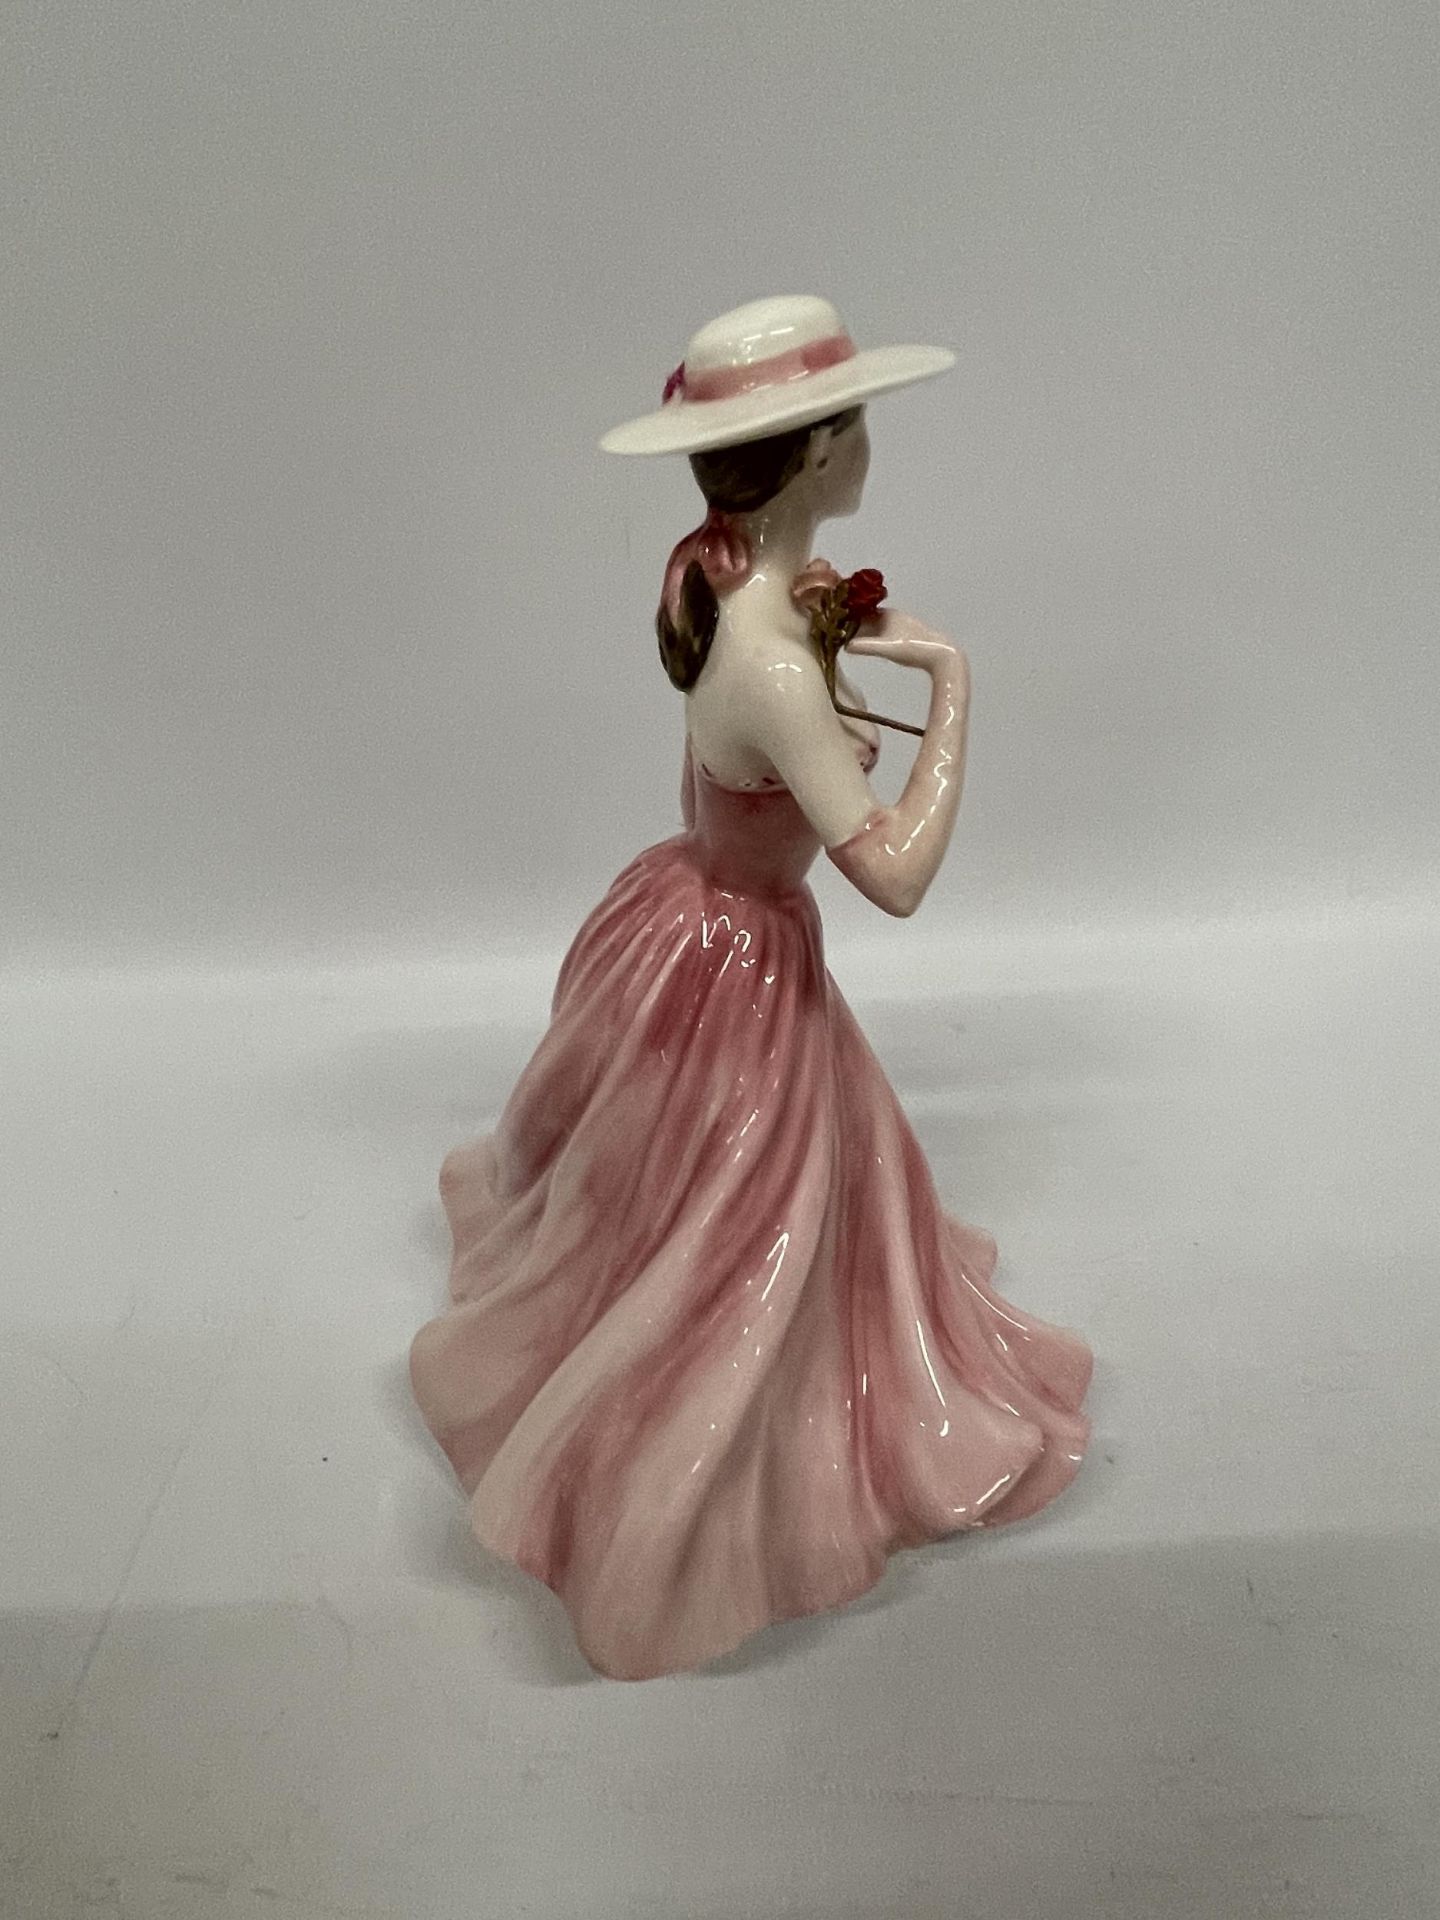 A ROYAL DOULTON 'CHLOE' LADY FO THE YEAR 2000 FIGURE